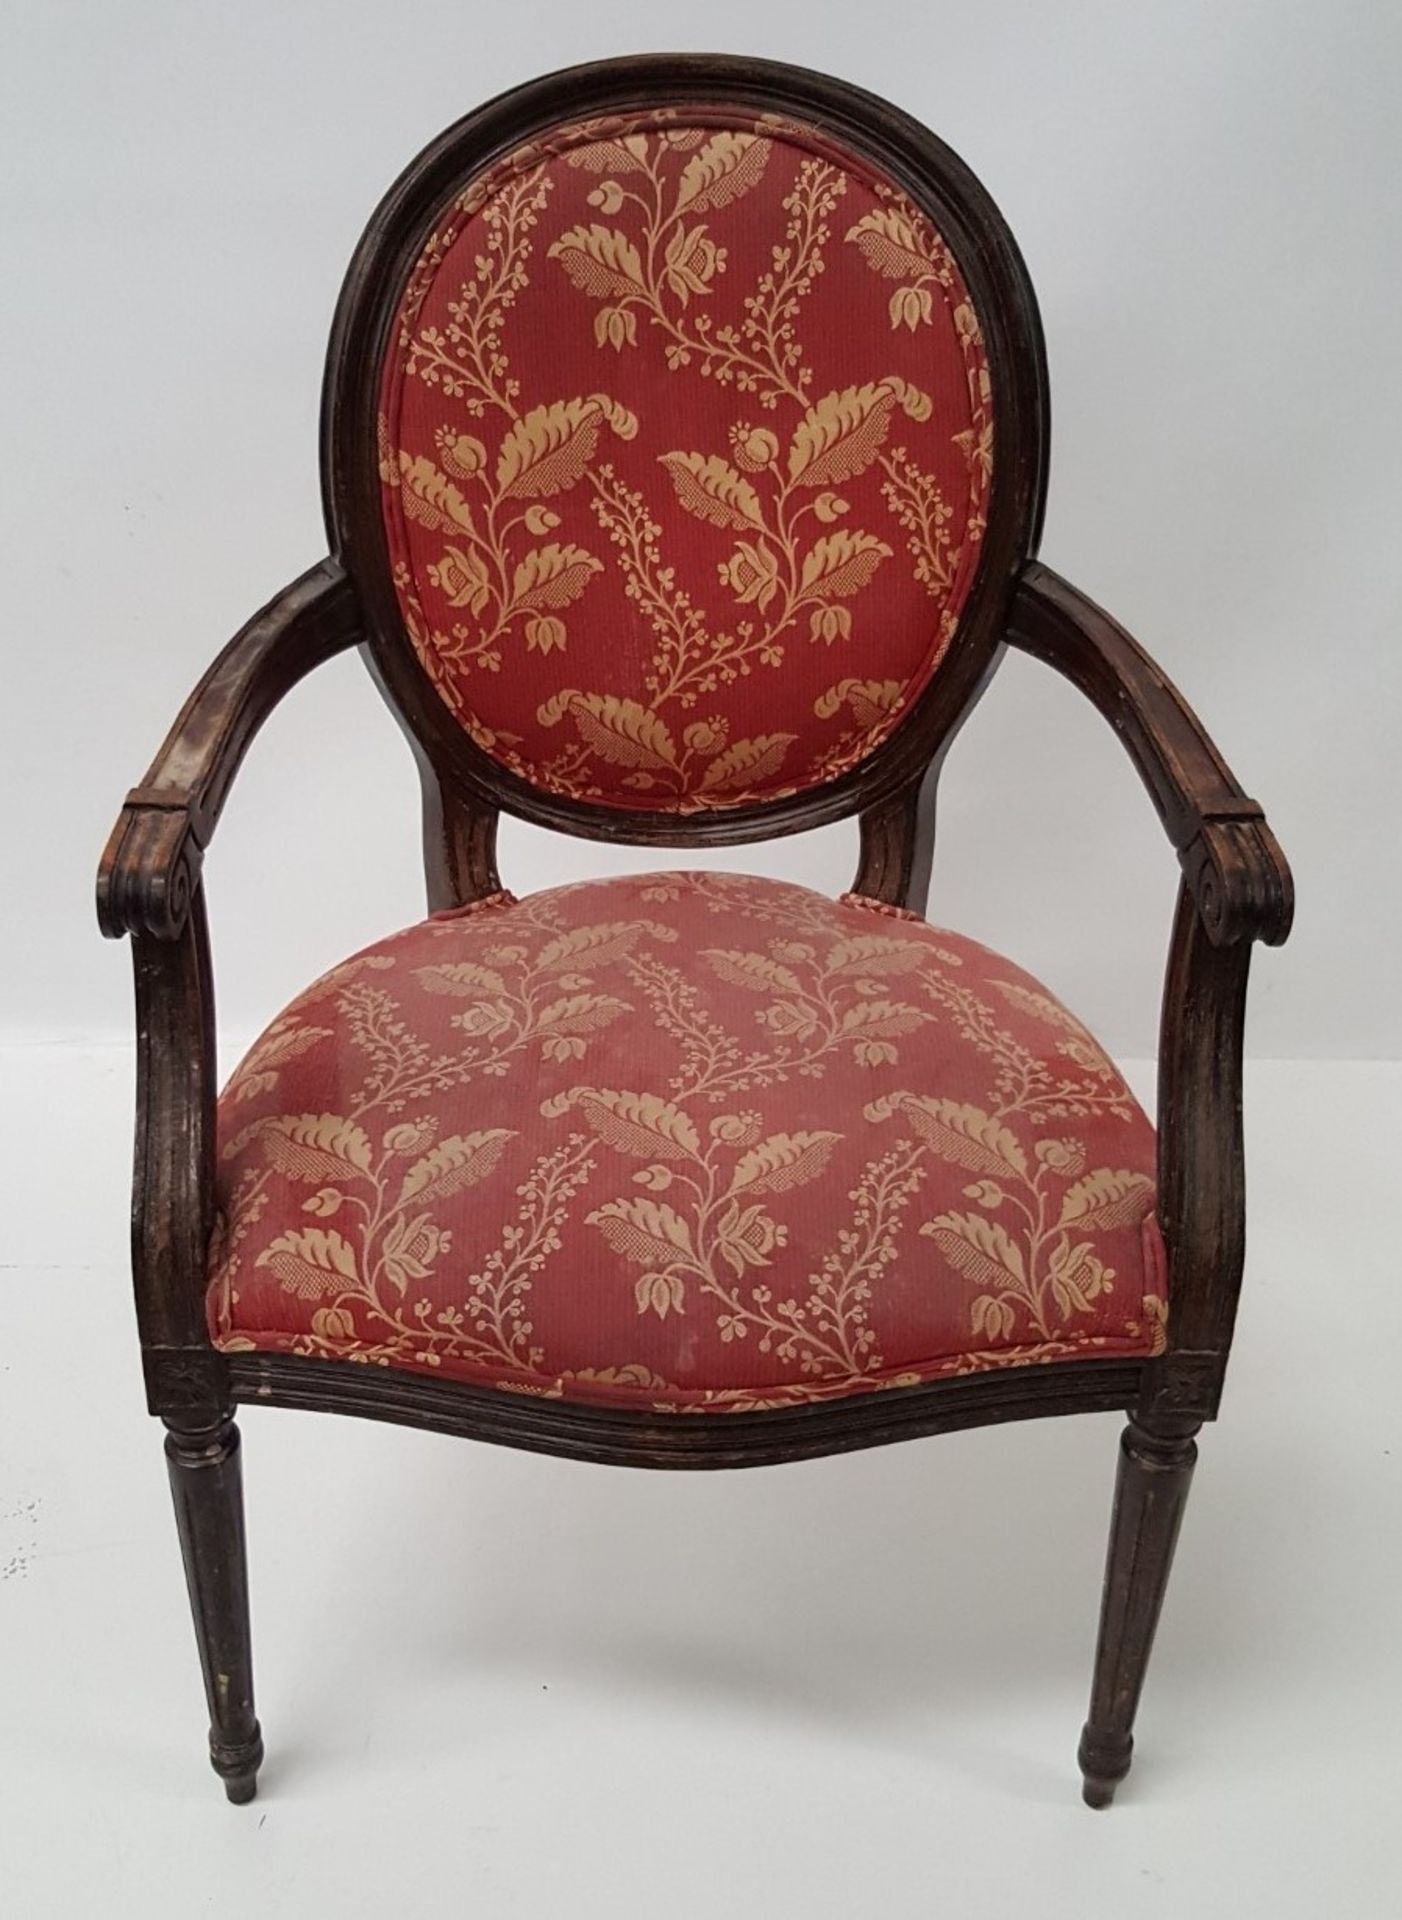 8 x Vintage Wooden Chairs Featuring Spindle Legs, And Upholstered In Red / Gold Floral Fabric - - Image 4 of 8